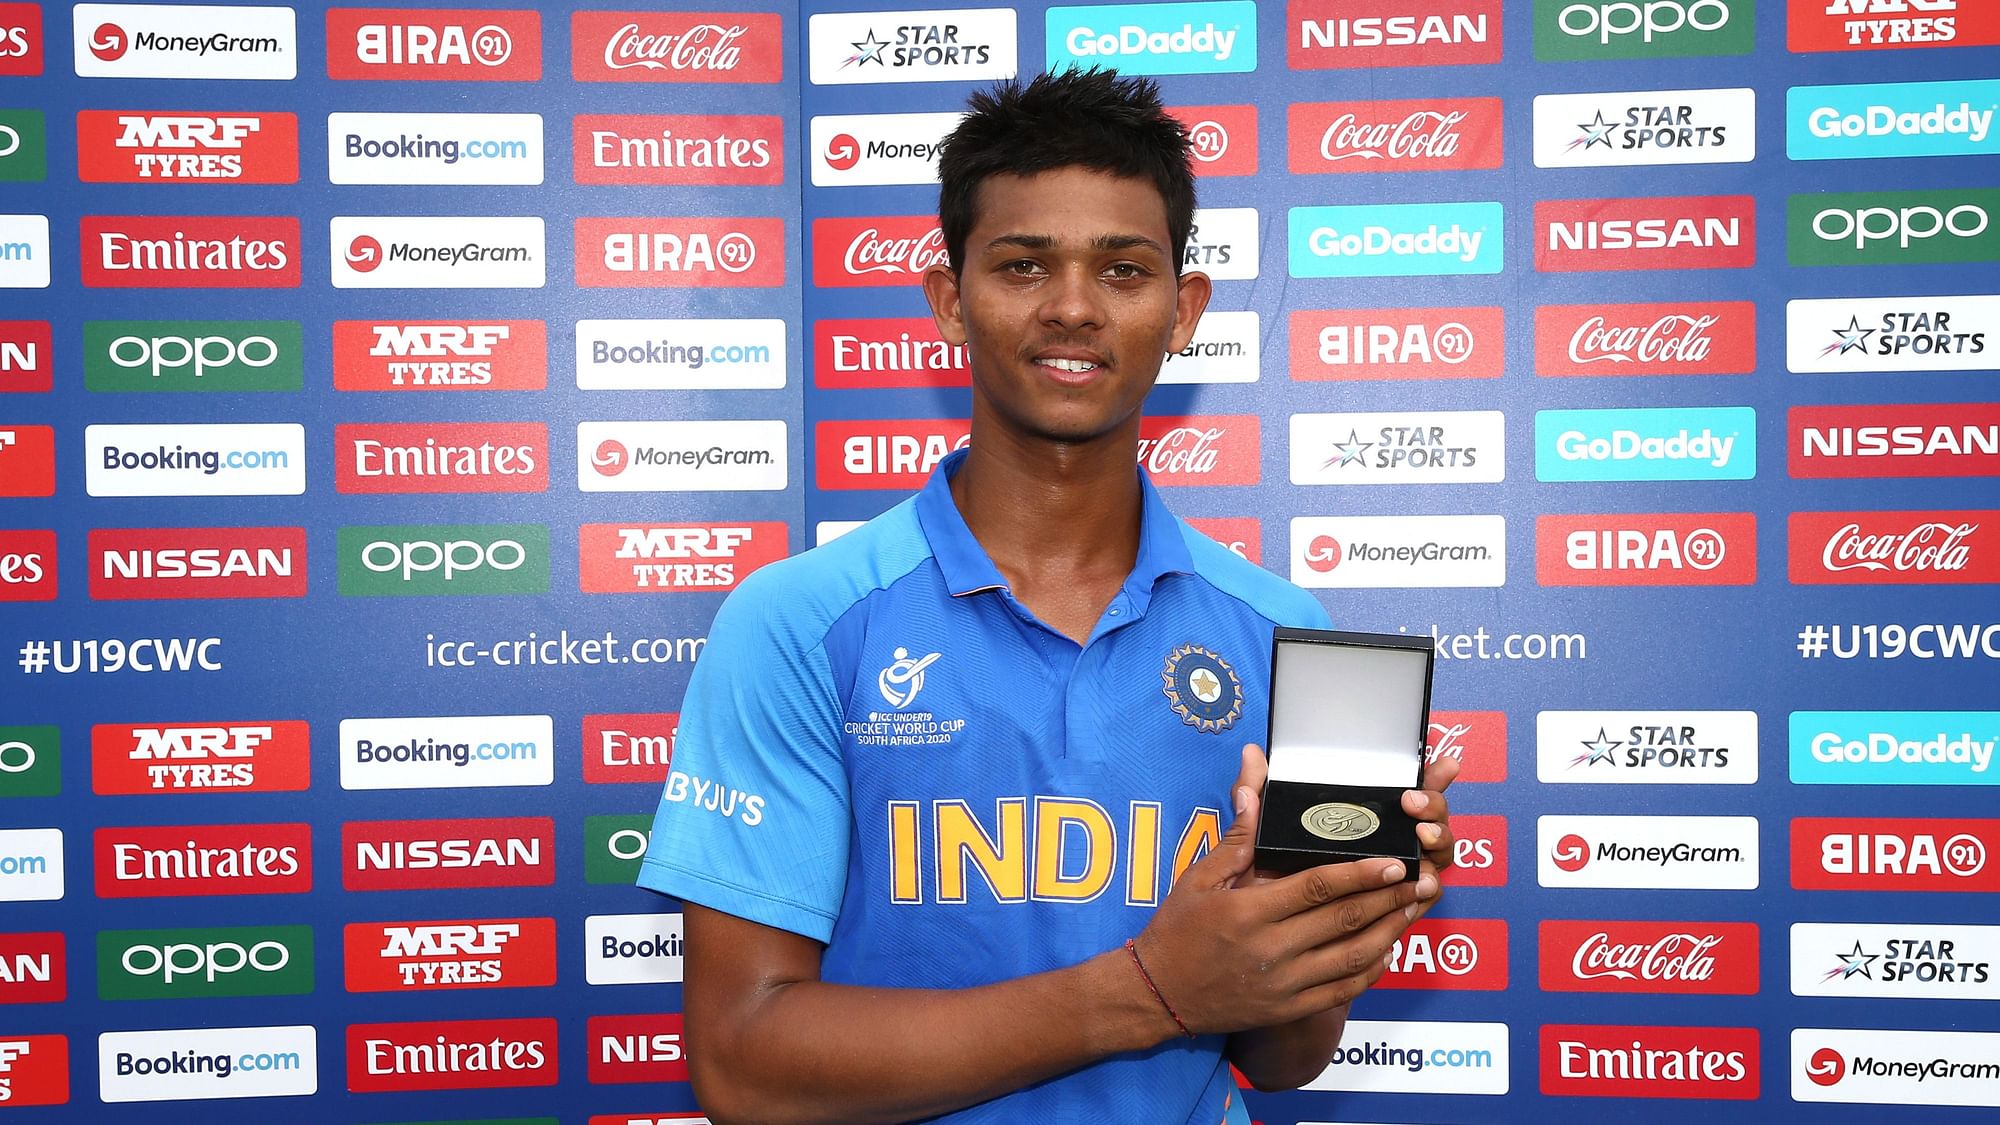 Yashasvi Jaiswal scored an unbeaten 105 off 113 deliveries as India beat Pakistan in the semi-final of the 2020 ICC U-19 World Cup by 10 wickets on Tuesday, 4 February.